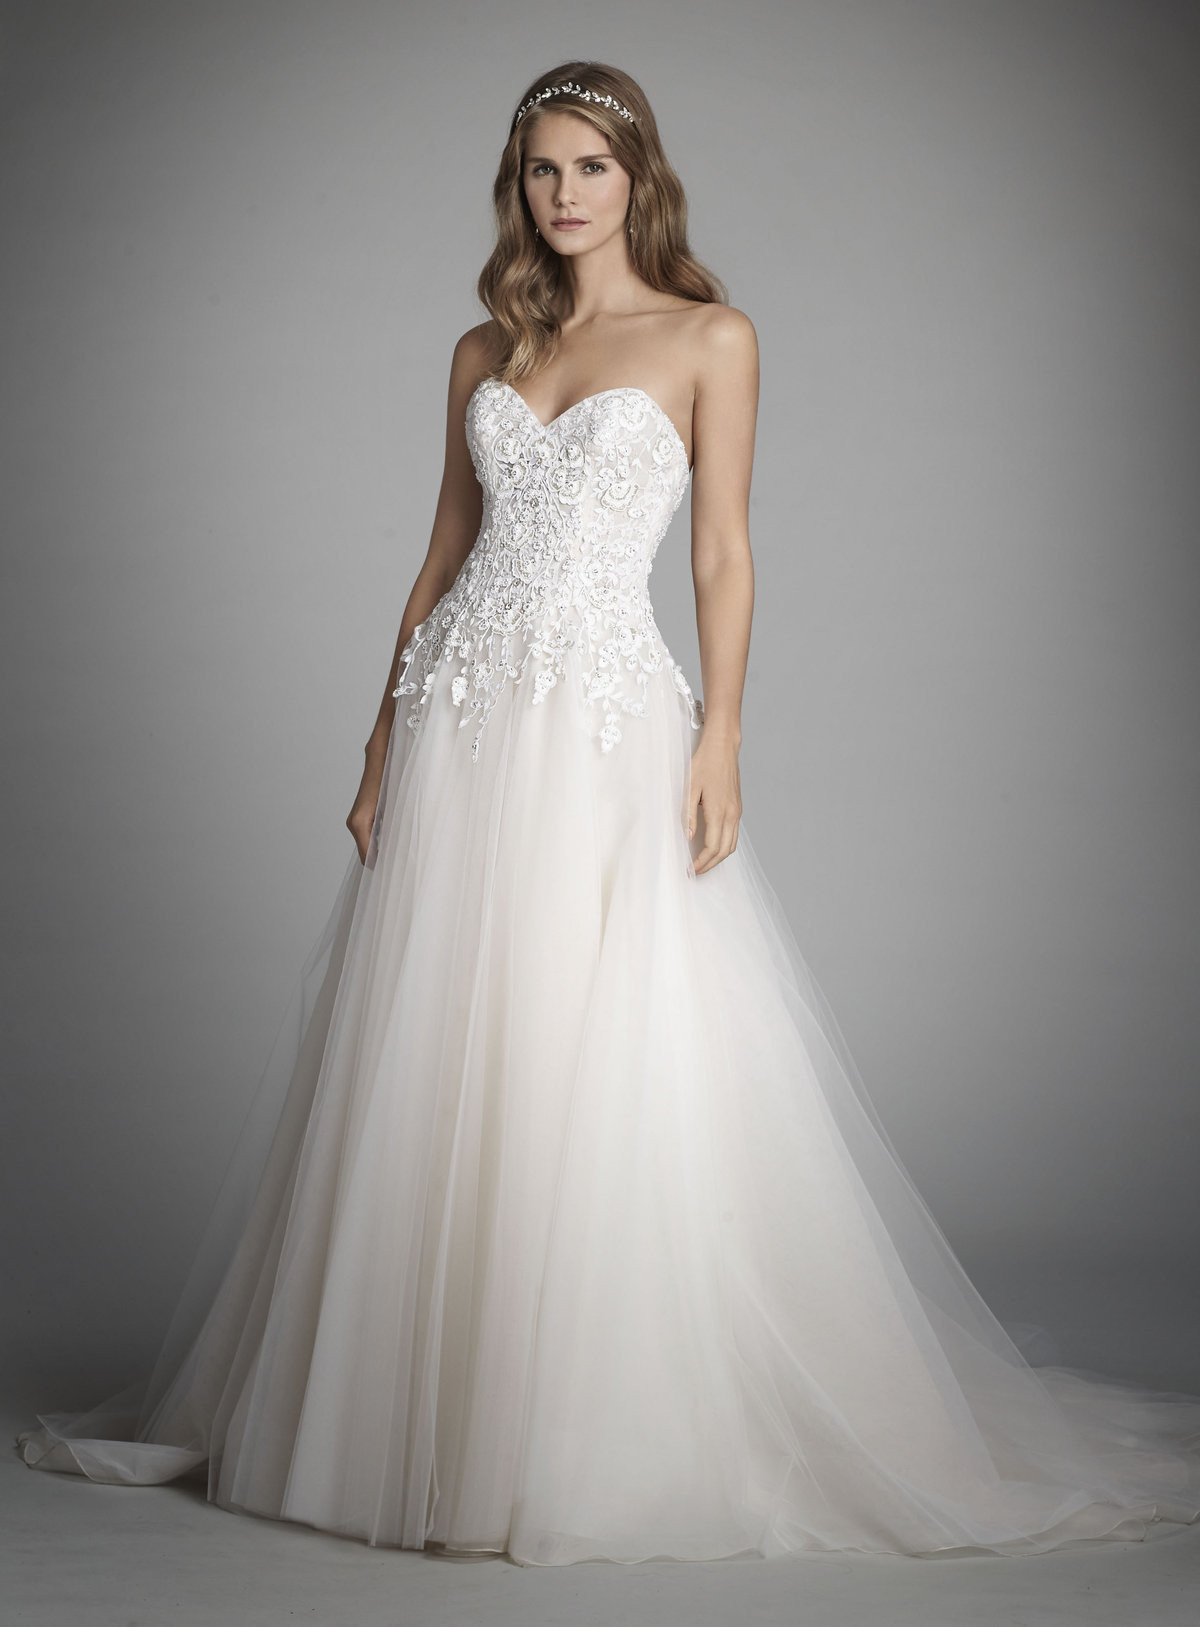 Wedding Dresses Pics
 Bridal Gowns and Wedding Dresses by JLM Couture Style 9702